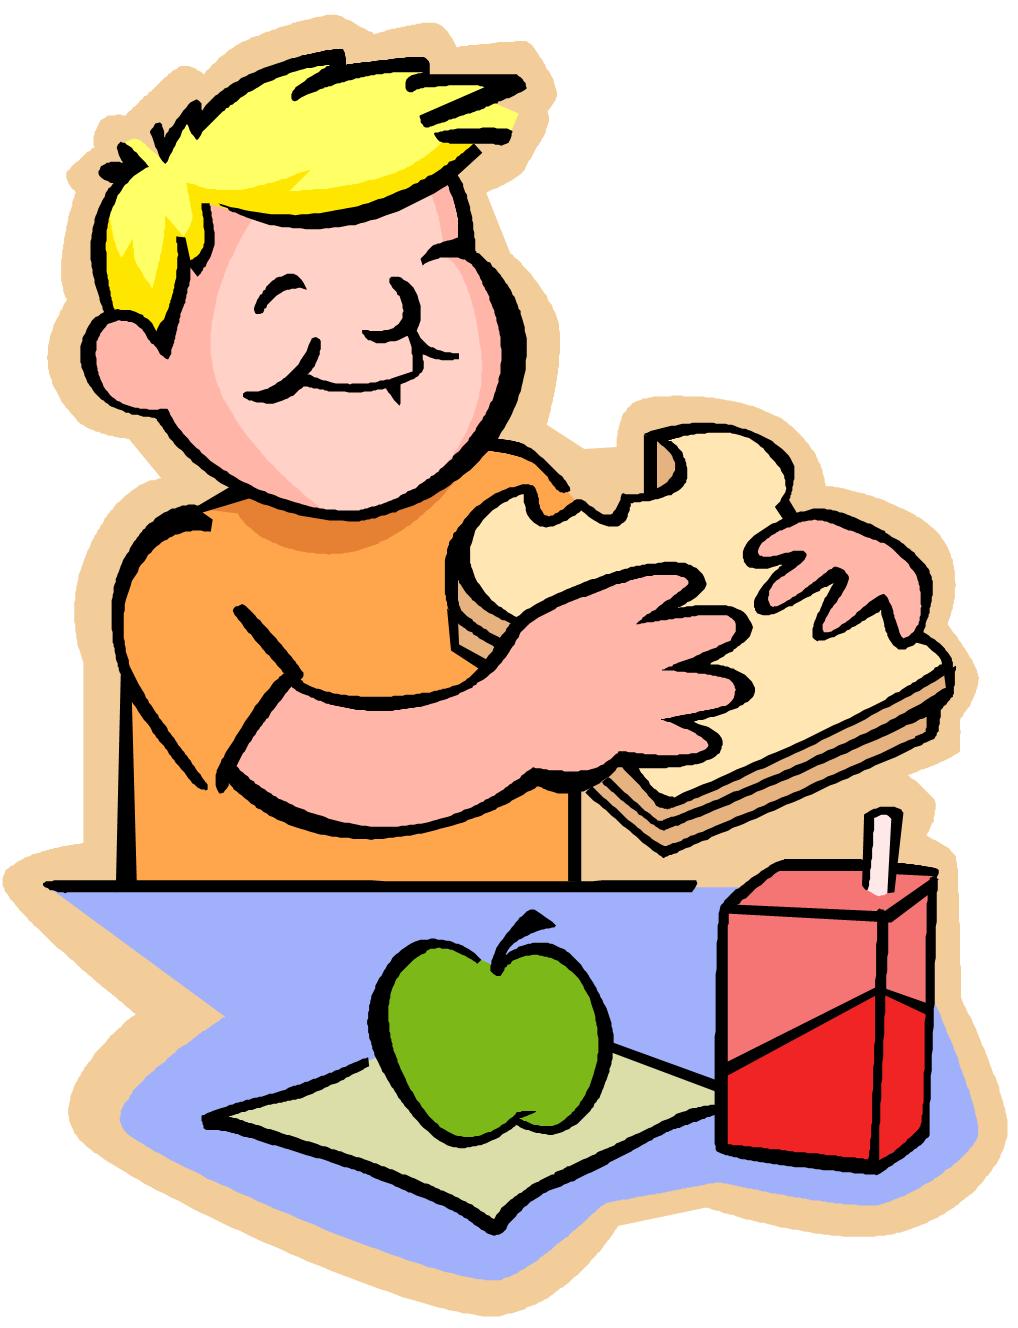 pack lunch clipart - photo #45